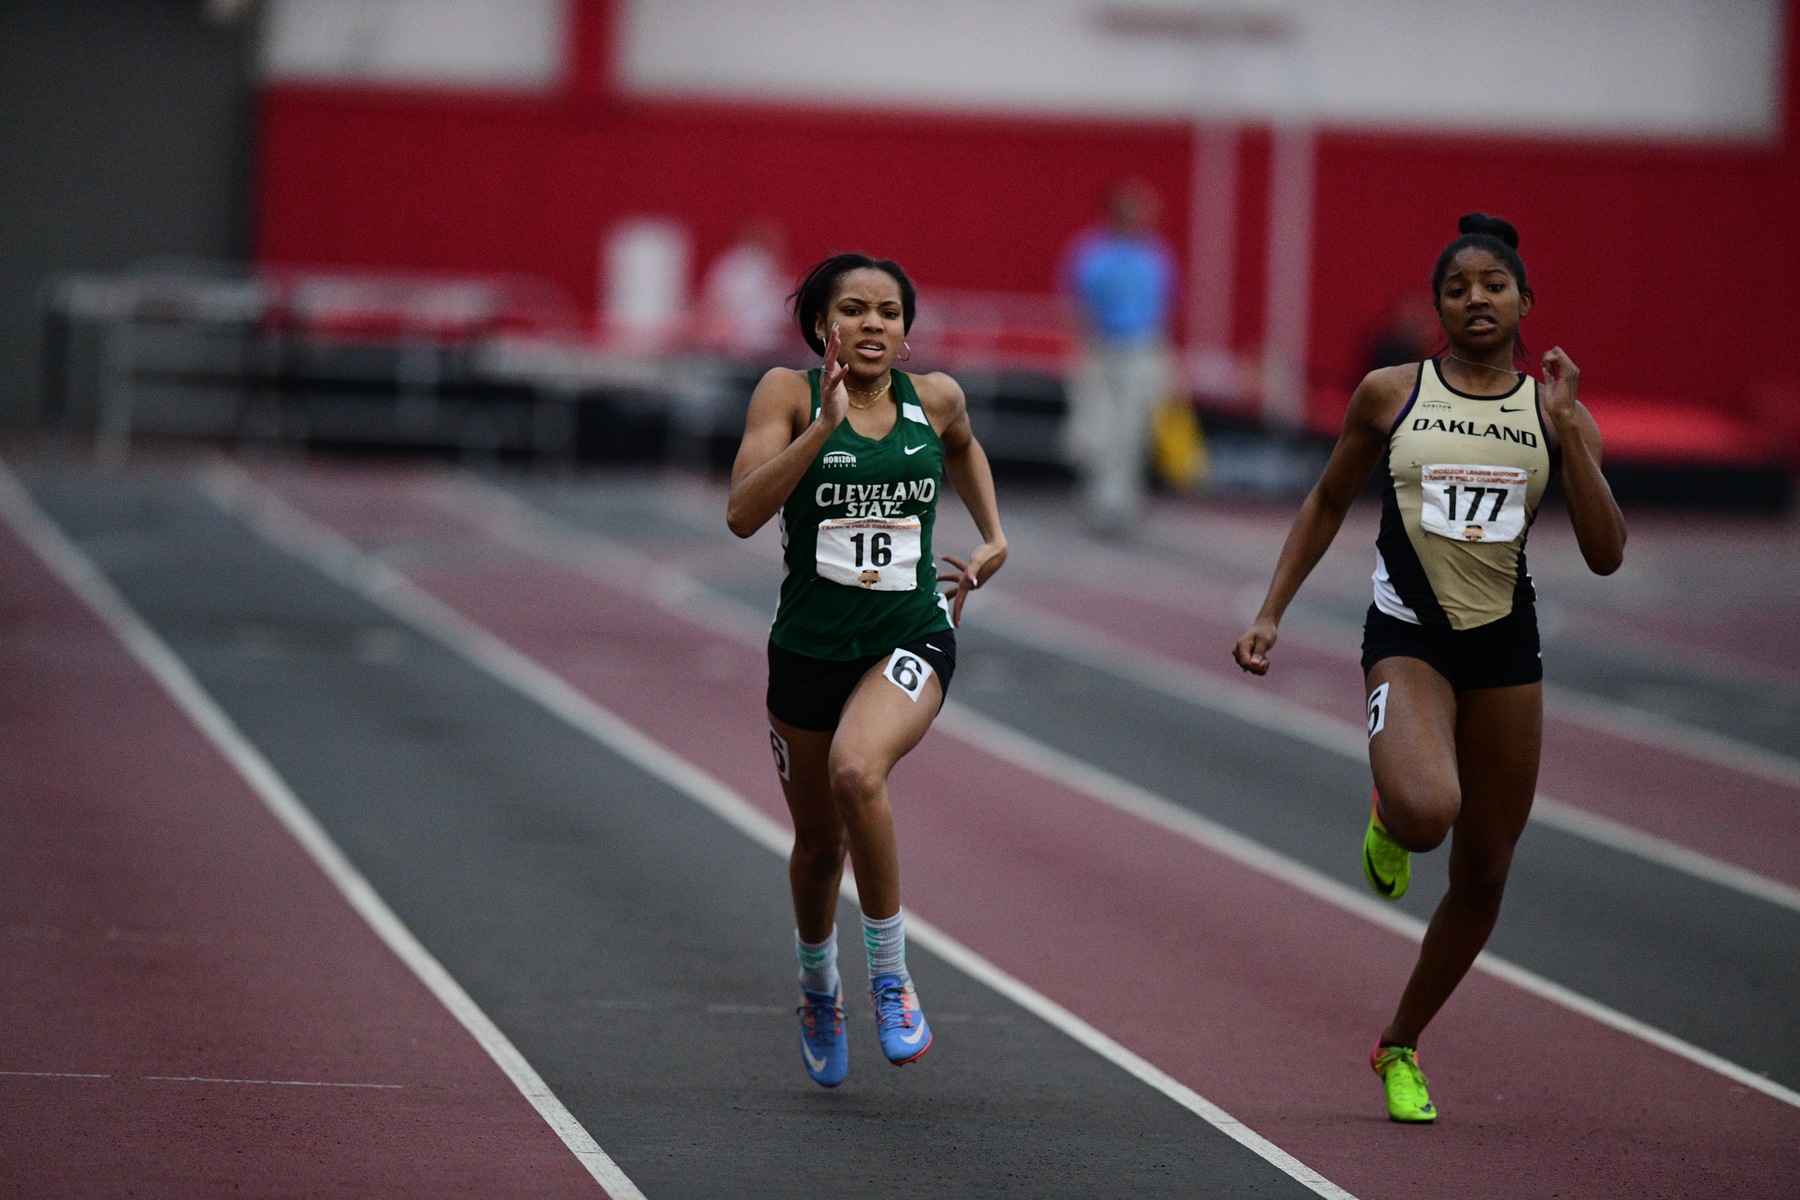 Cleveland State’s Mixon Places Third In 100 Meter Dash At #HLTF Championships